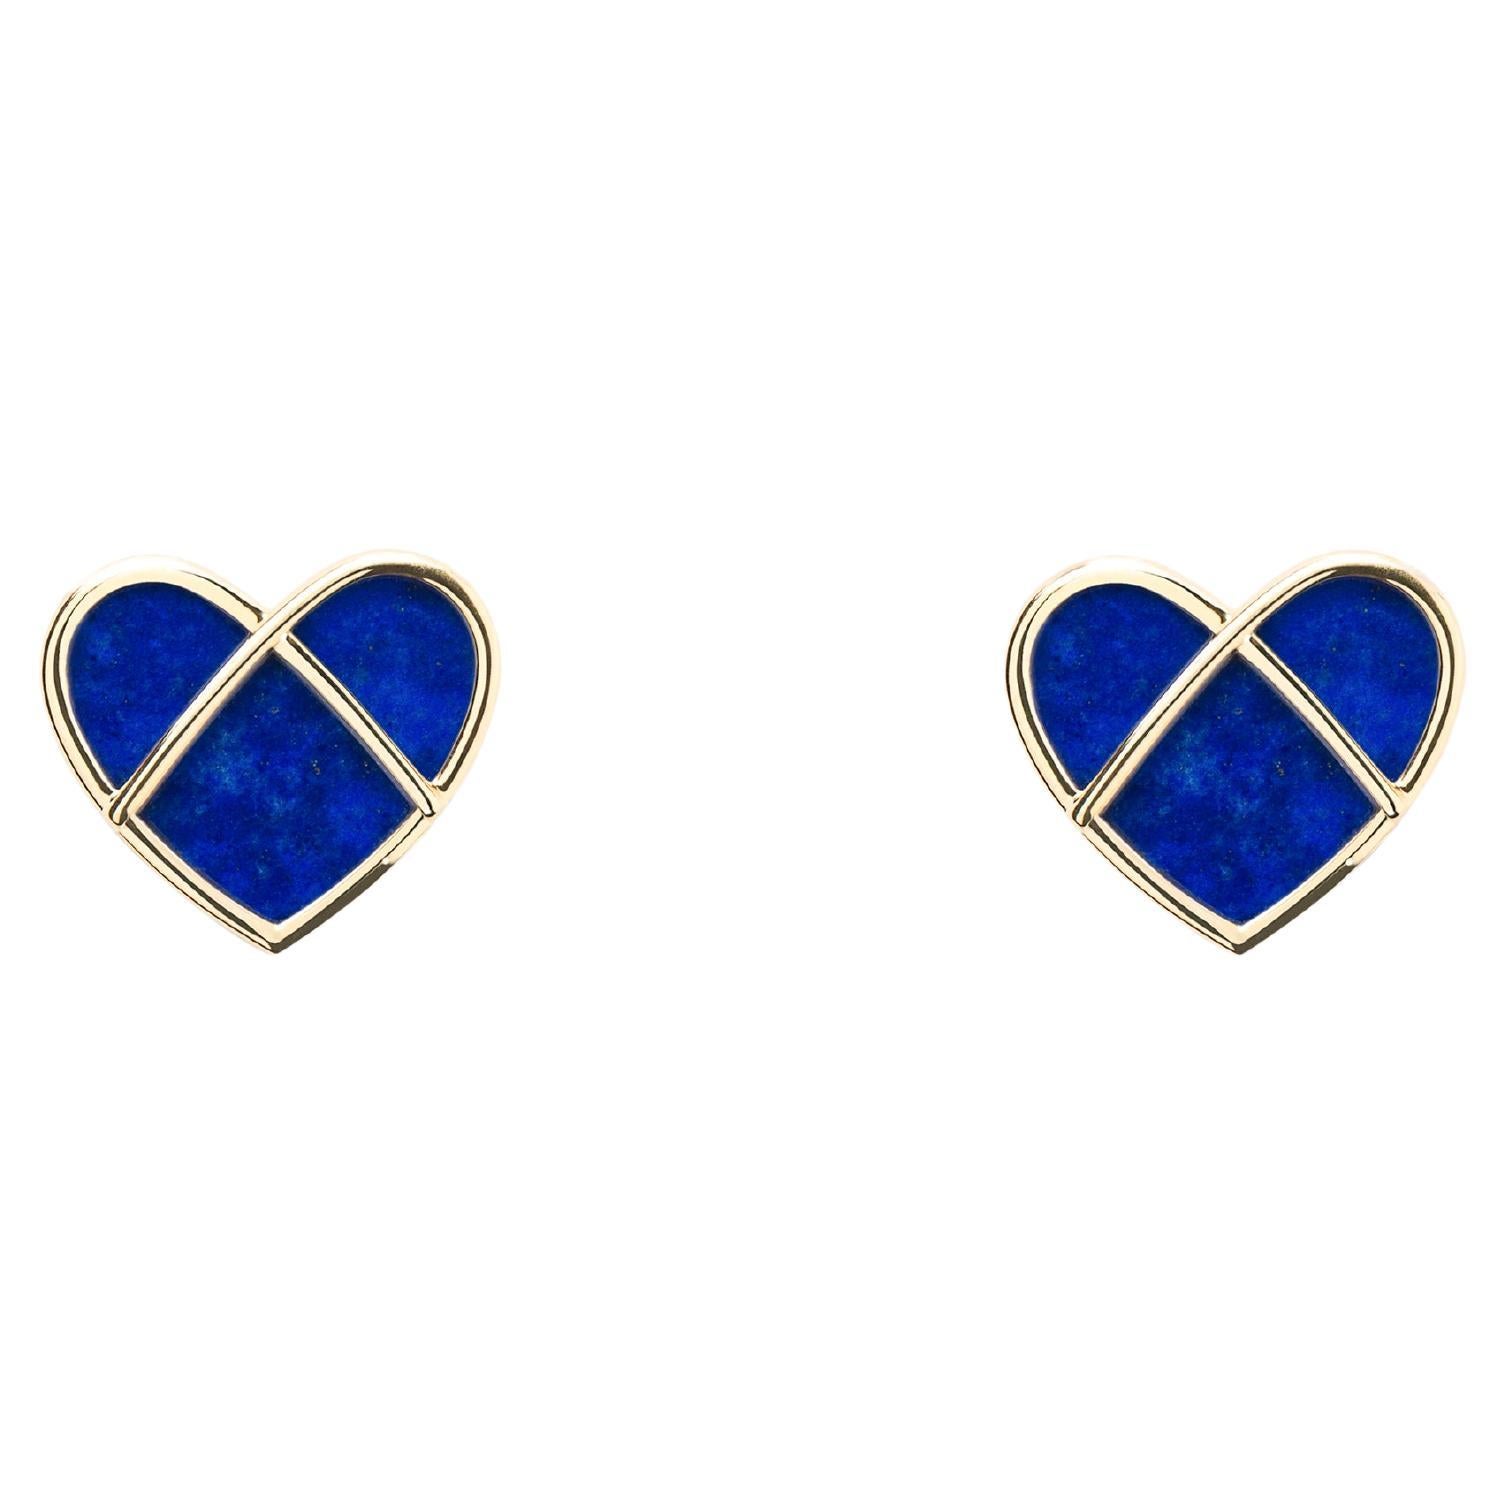 18 Carat Gold Lapis-Lazuli earrings, Yellow Gold, L'Attrape Coeur Collection